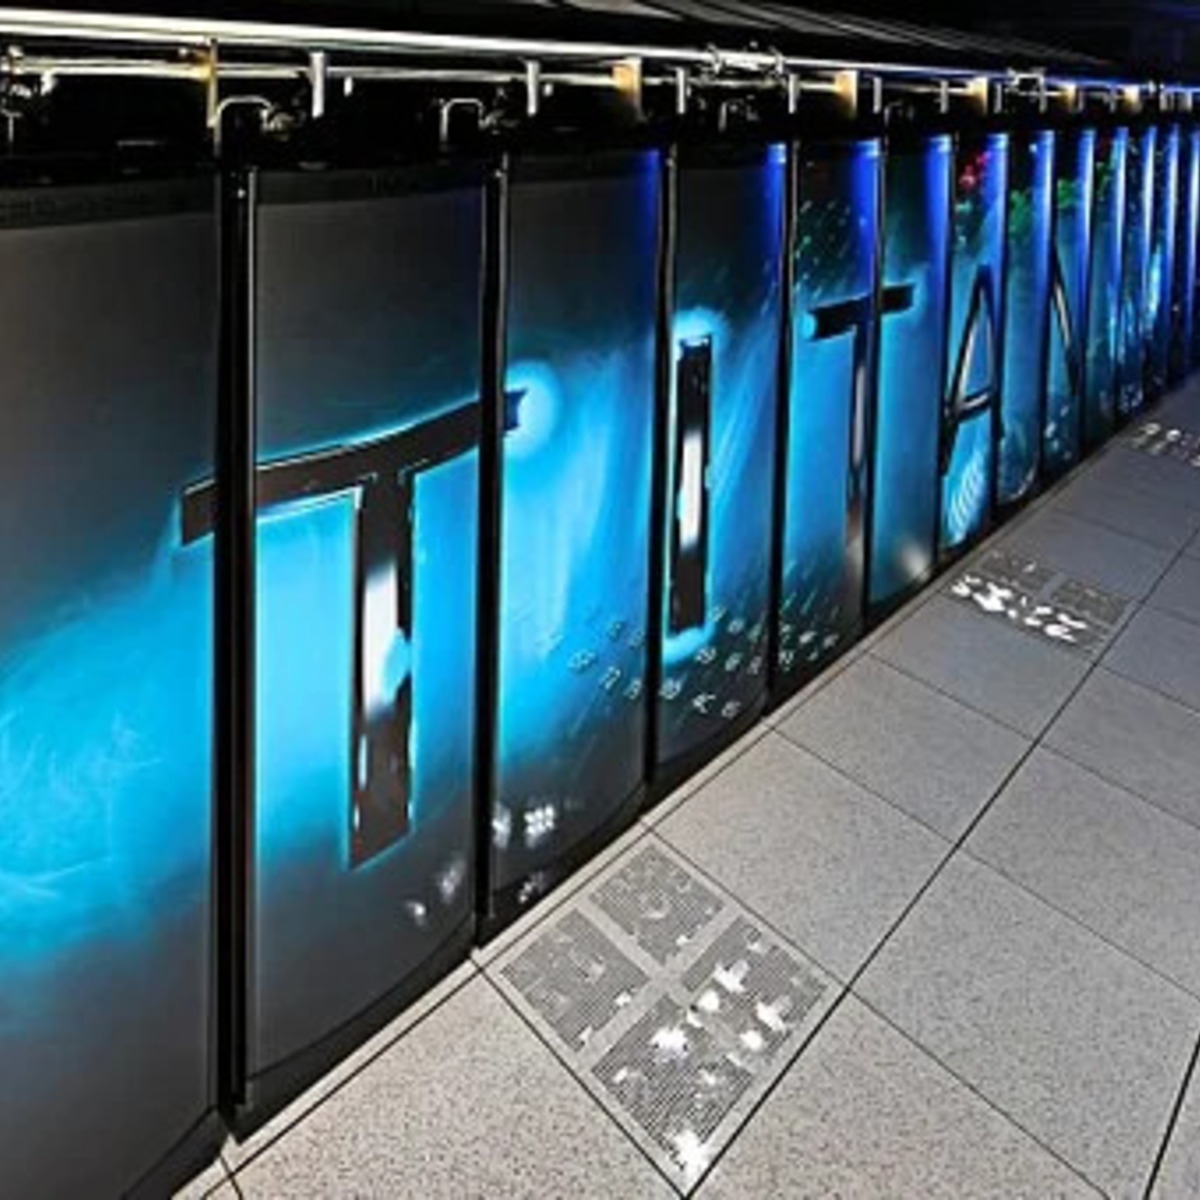 Supercomputers are large systems that are specifically designed to solve complex scientific and industrial challenges